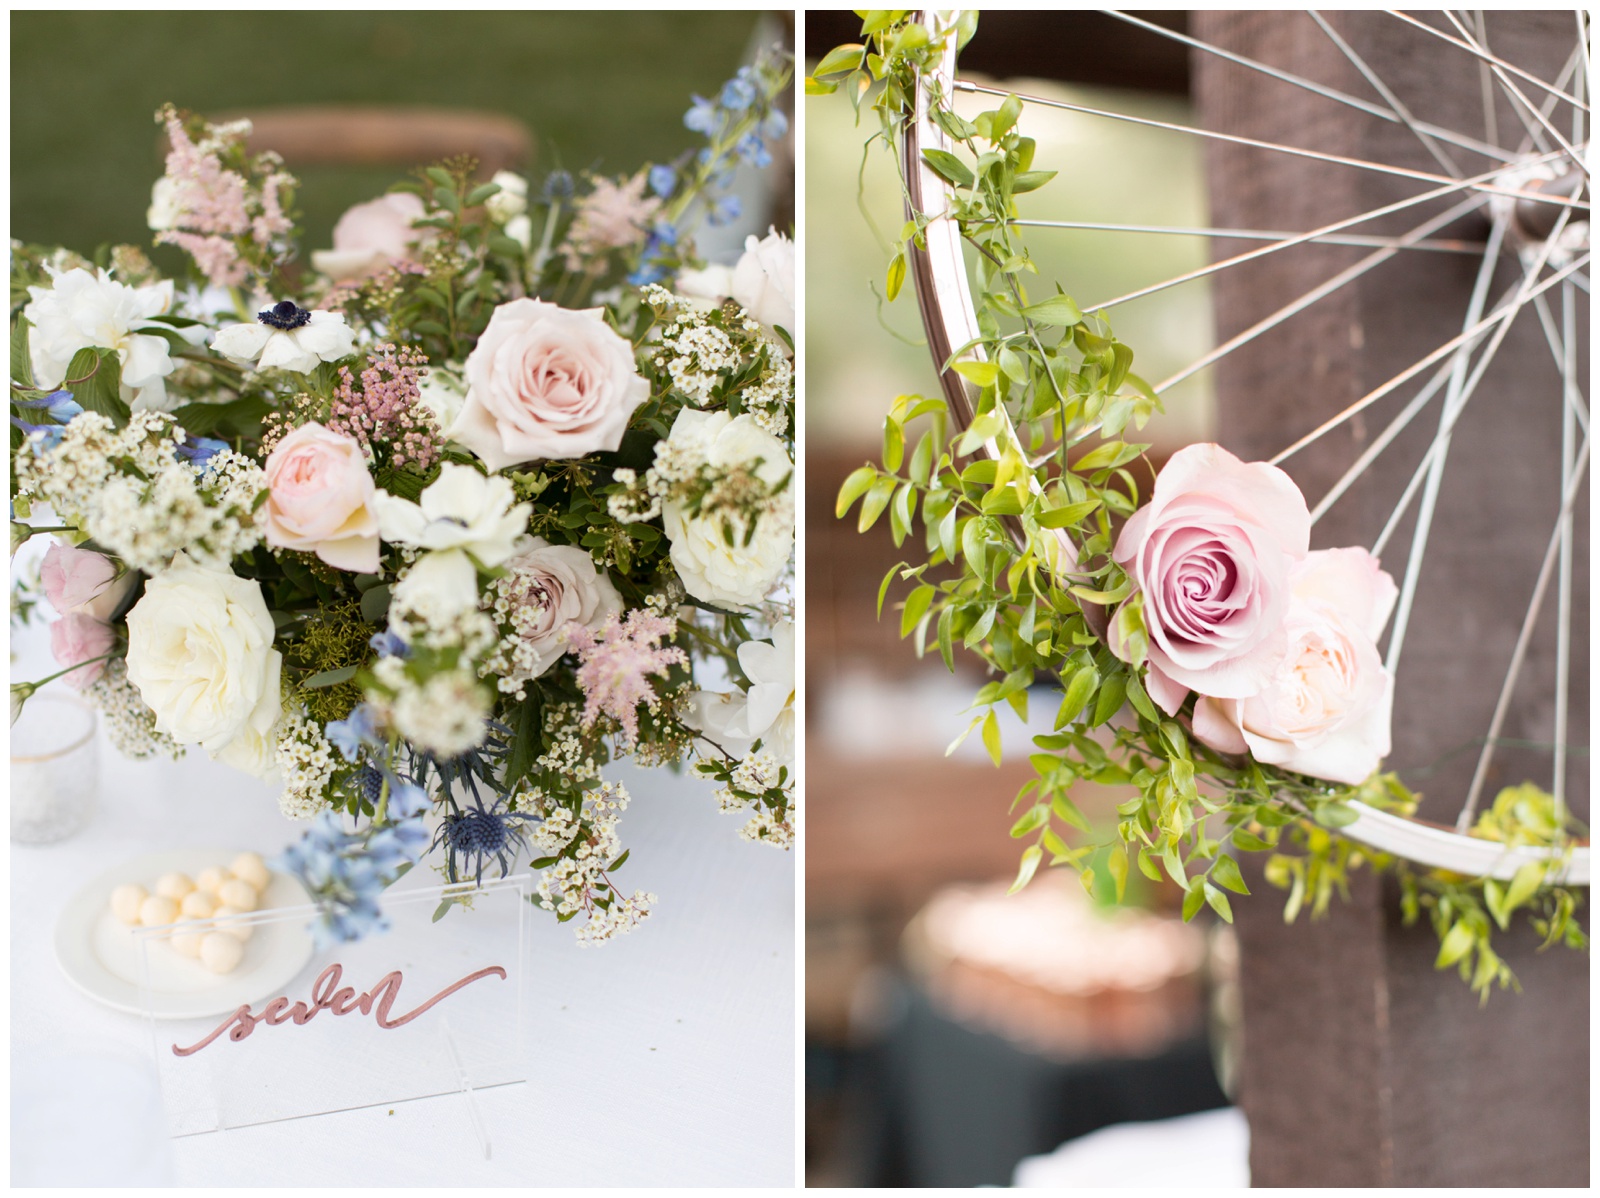 Floral themed wedding at Stone House Winery Temecula